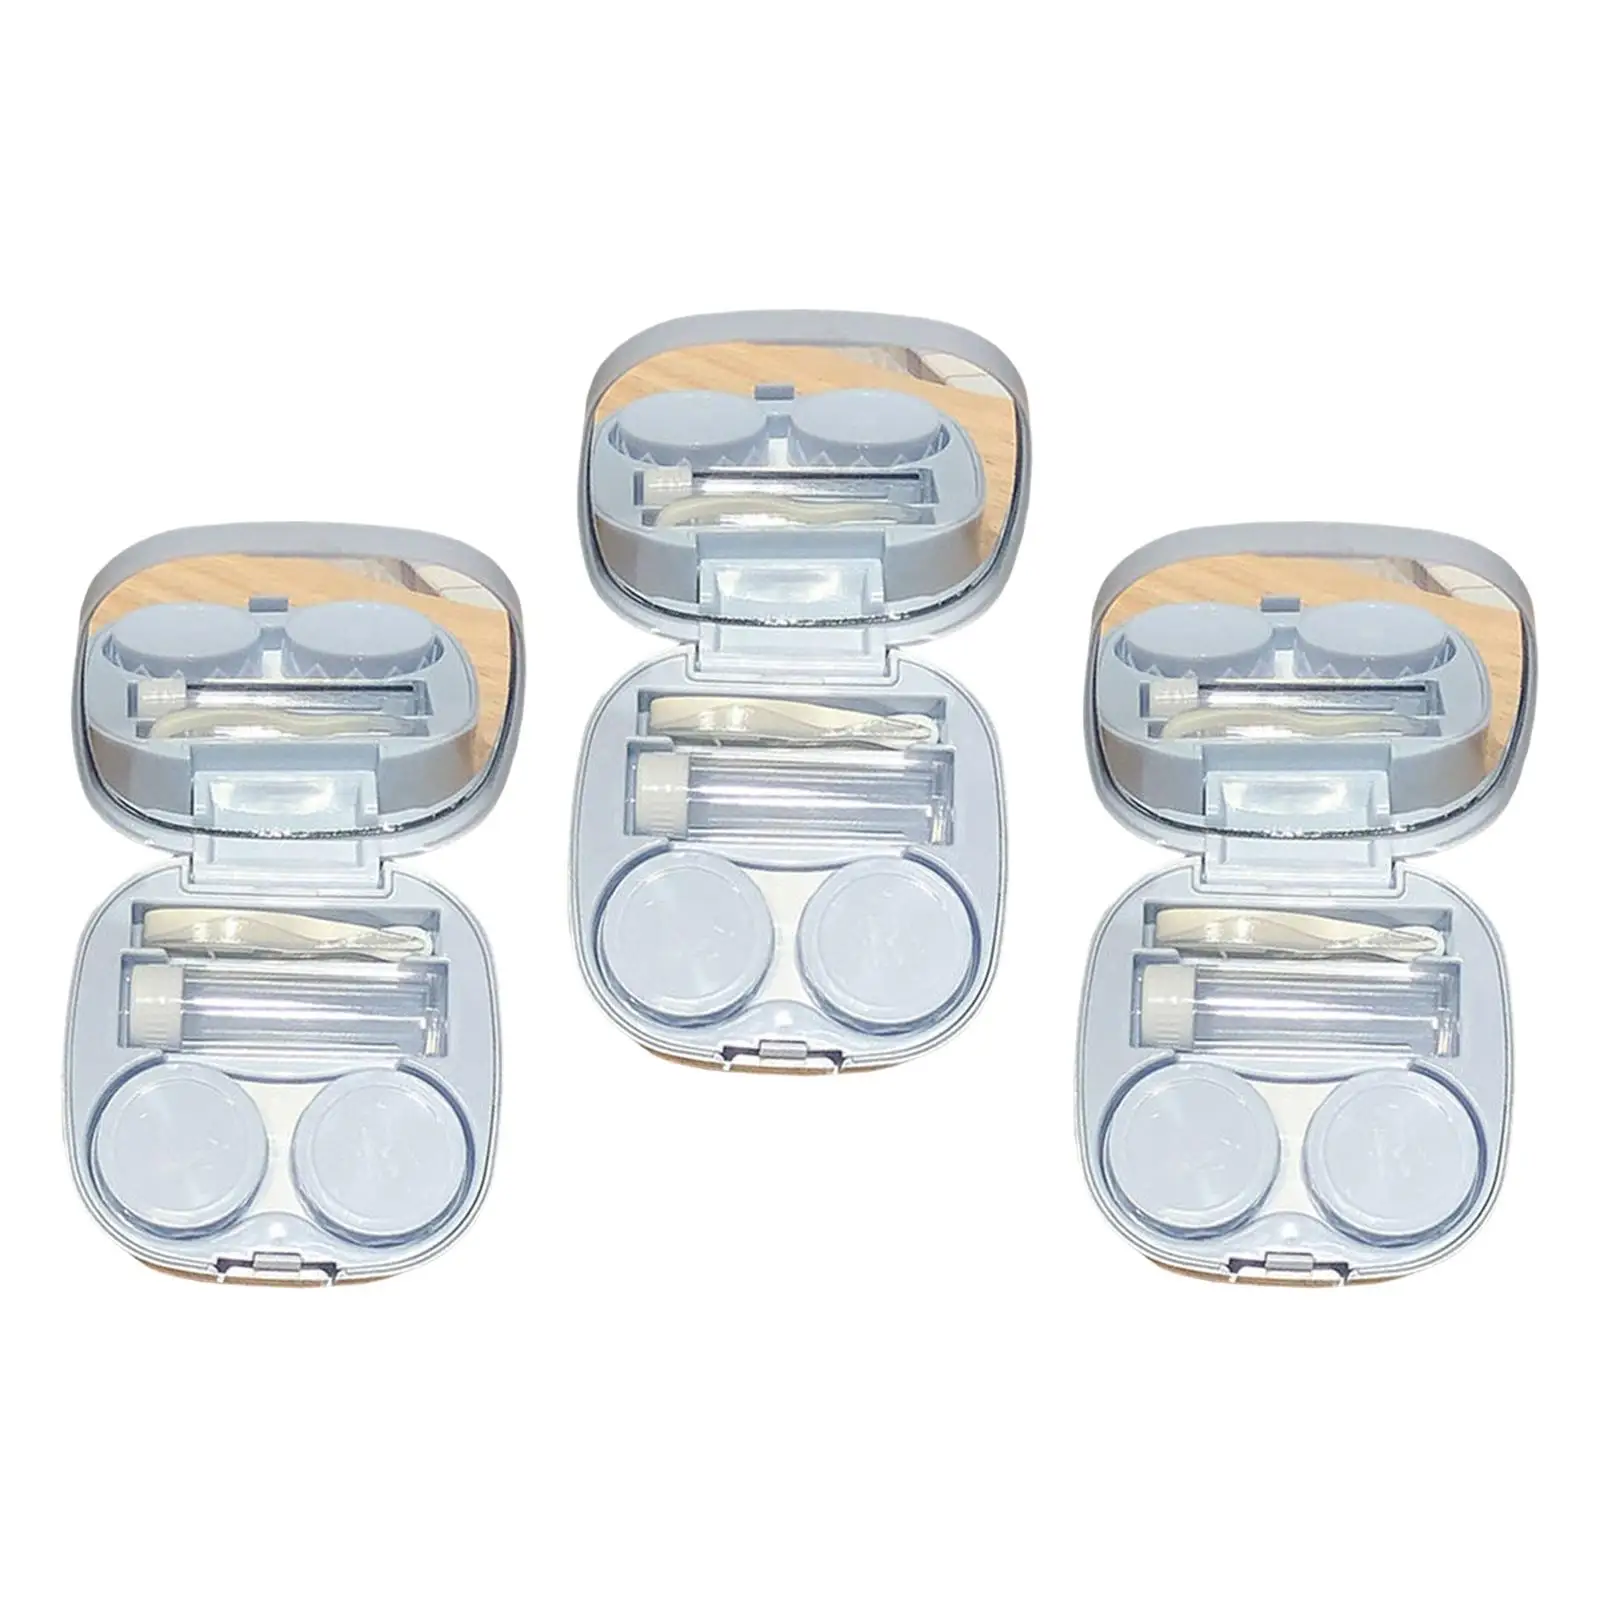 Pack of 3 Compact Contact Lens Case Kit with Mirror Leakproof Mini Contact Lens Storage Box for Daily Use Sturdy Small Size